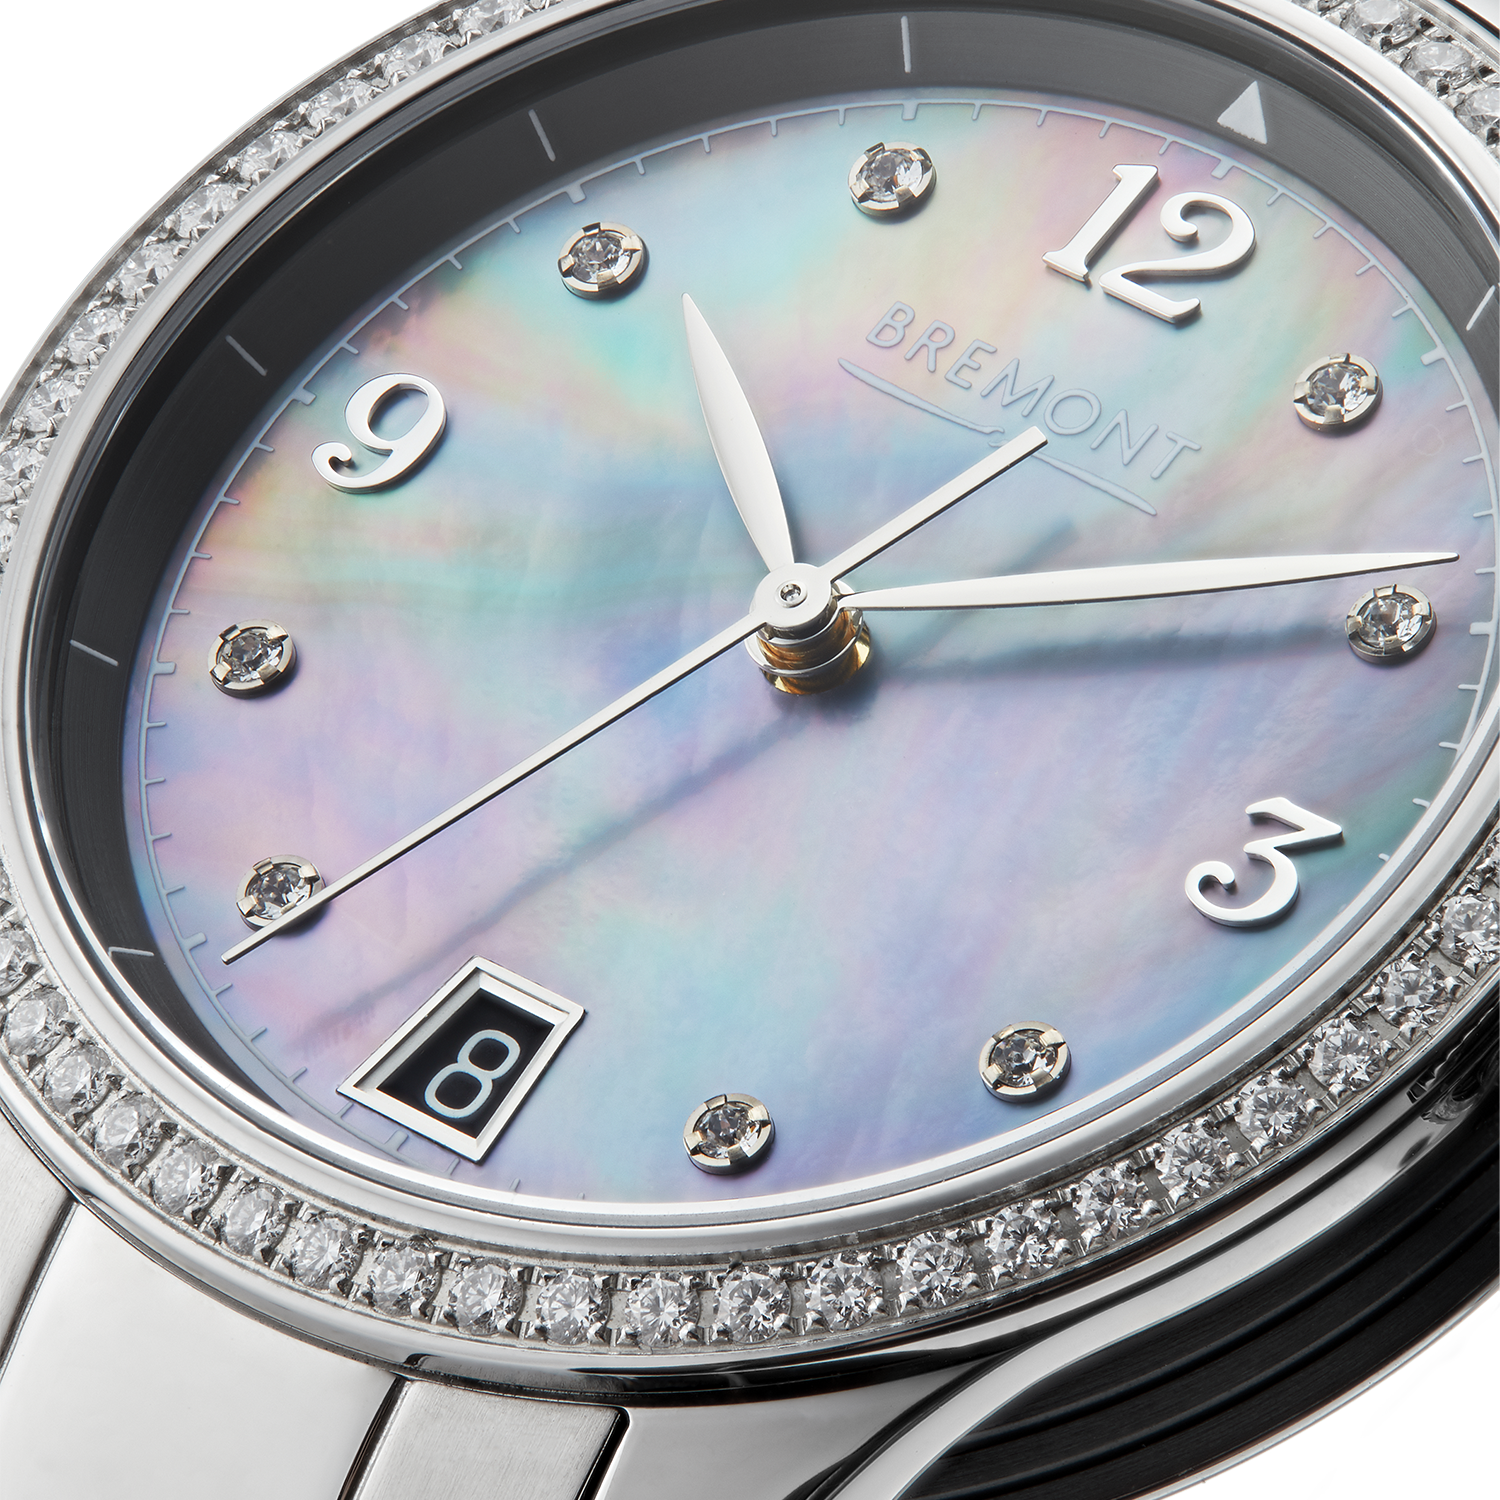 Bremont Watch Company Watches | Ladies | SOLO-34 SOLO Lady K